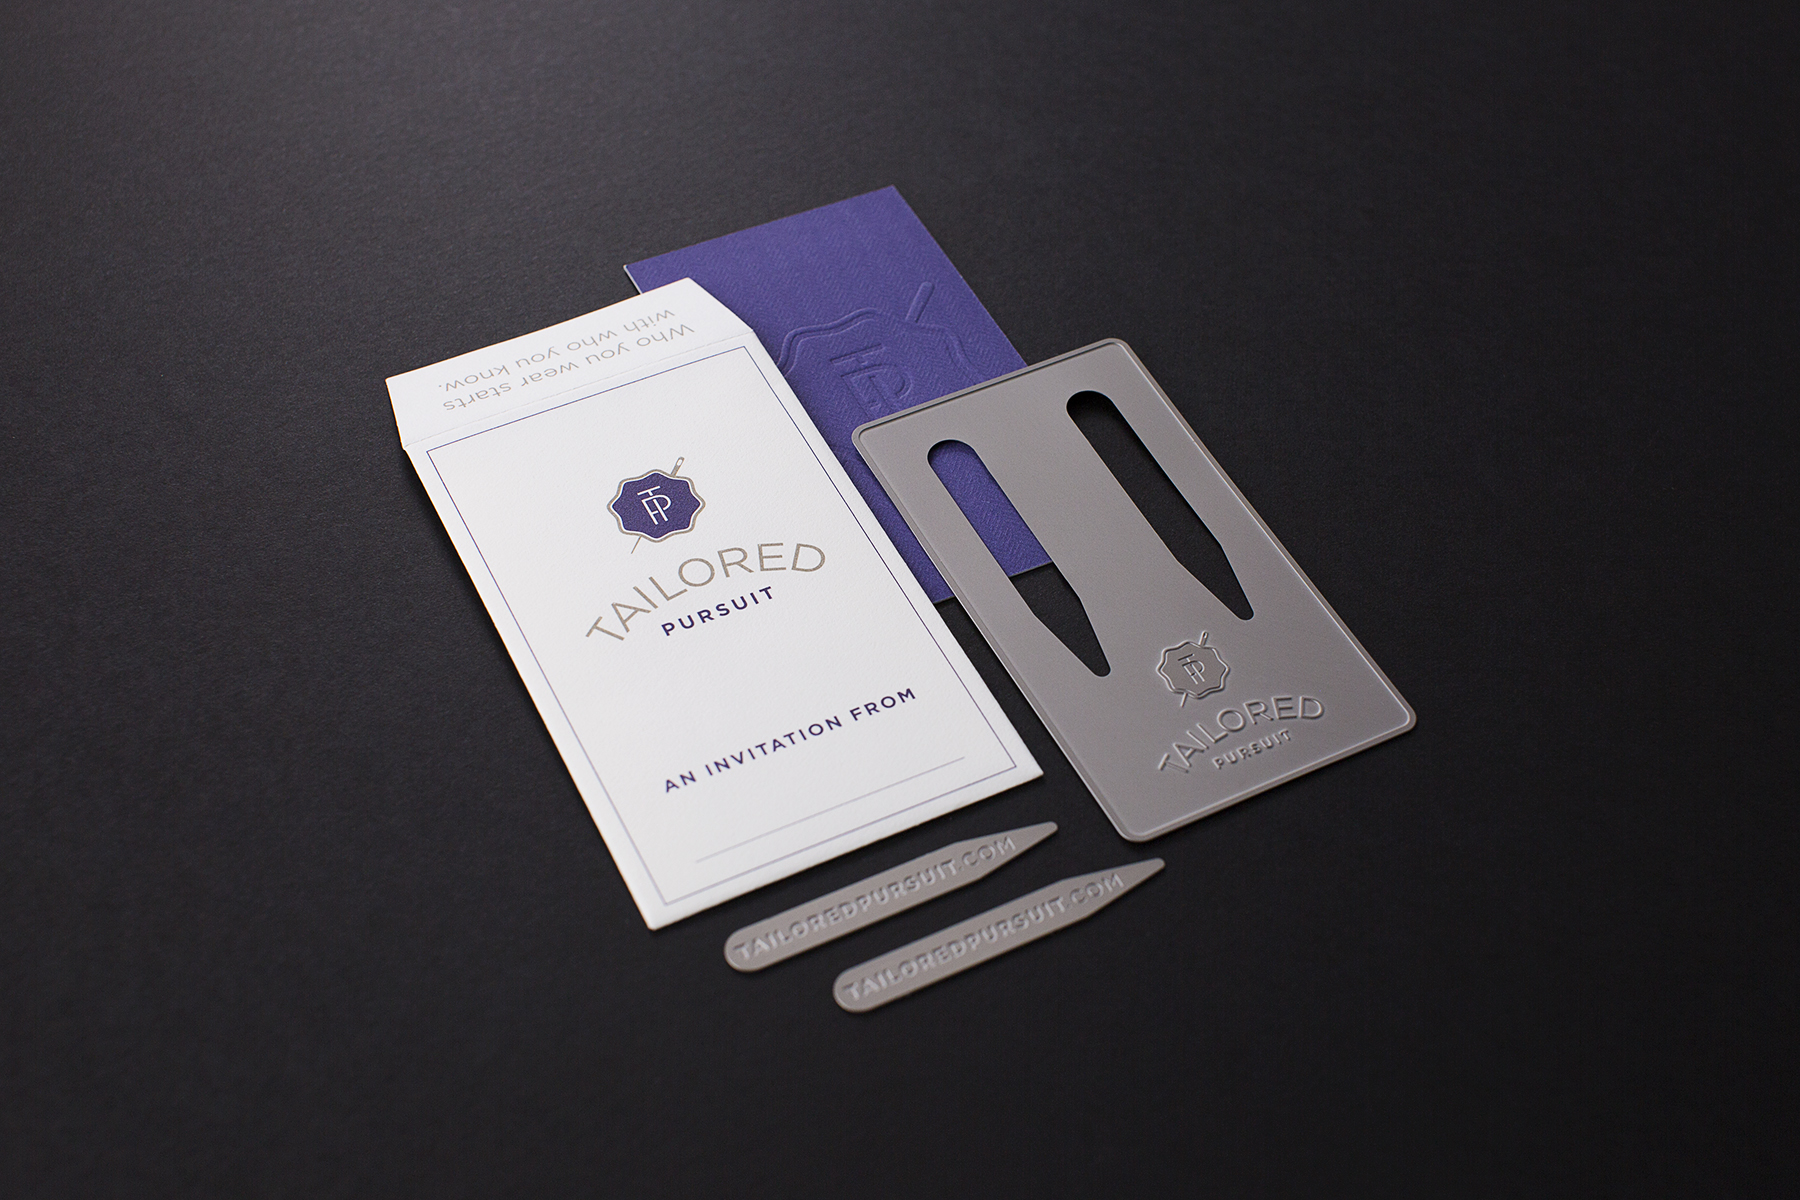  These collar stays included the company URL for more details and to apply for membership into this exclusive club. 